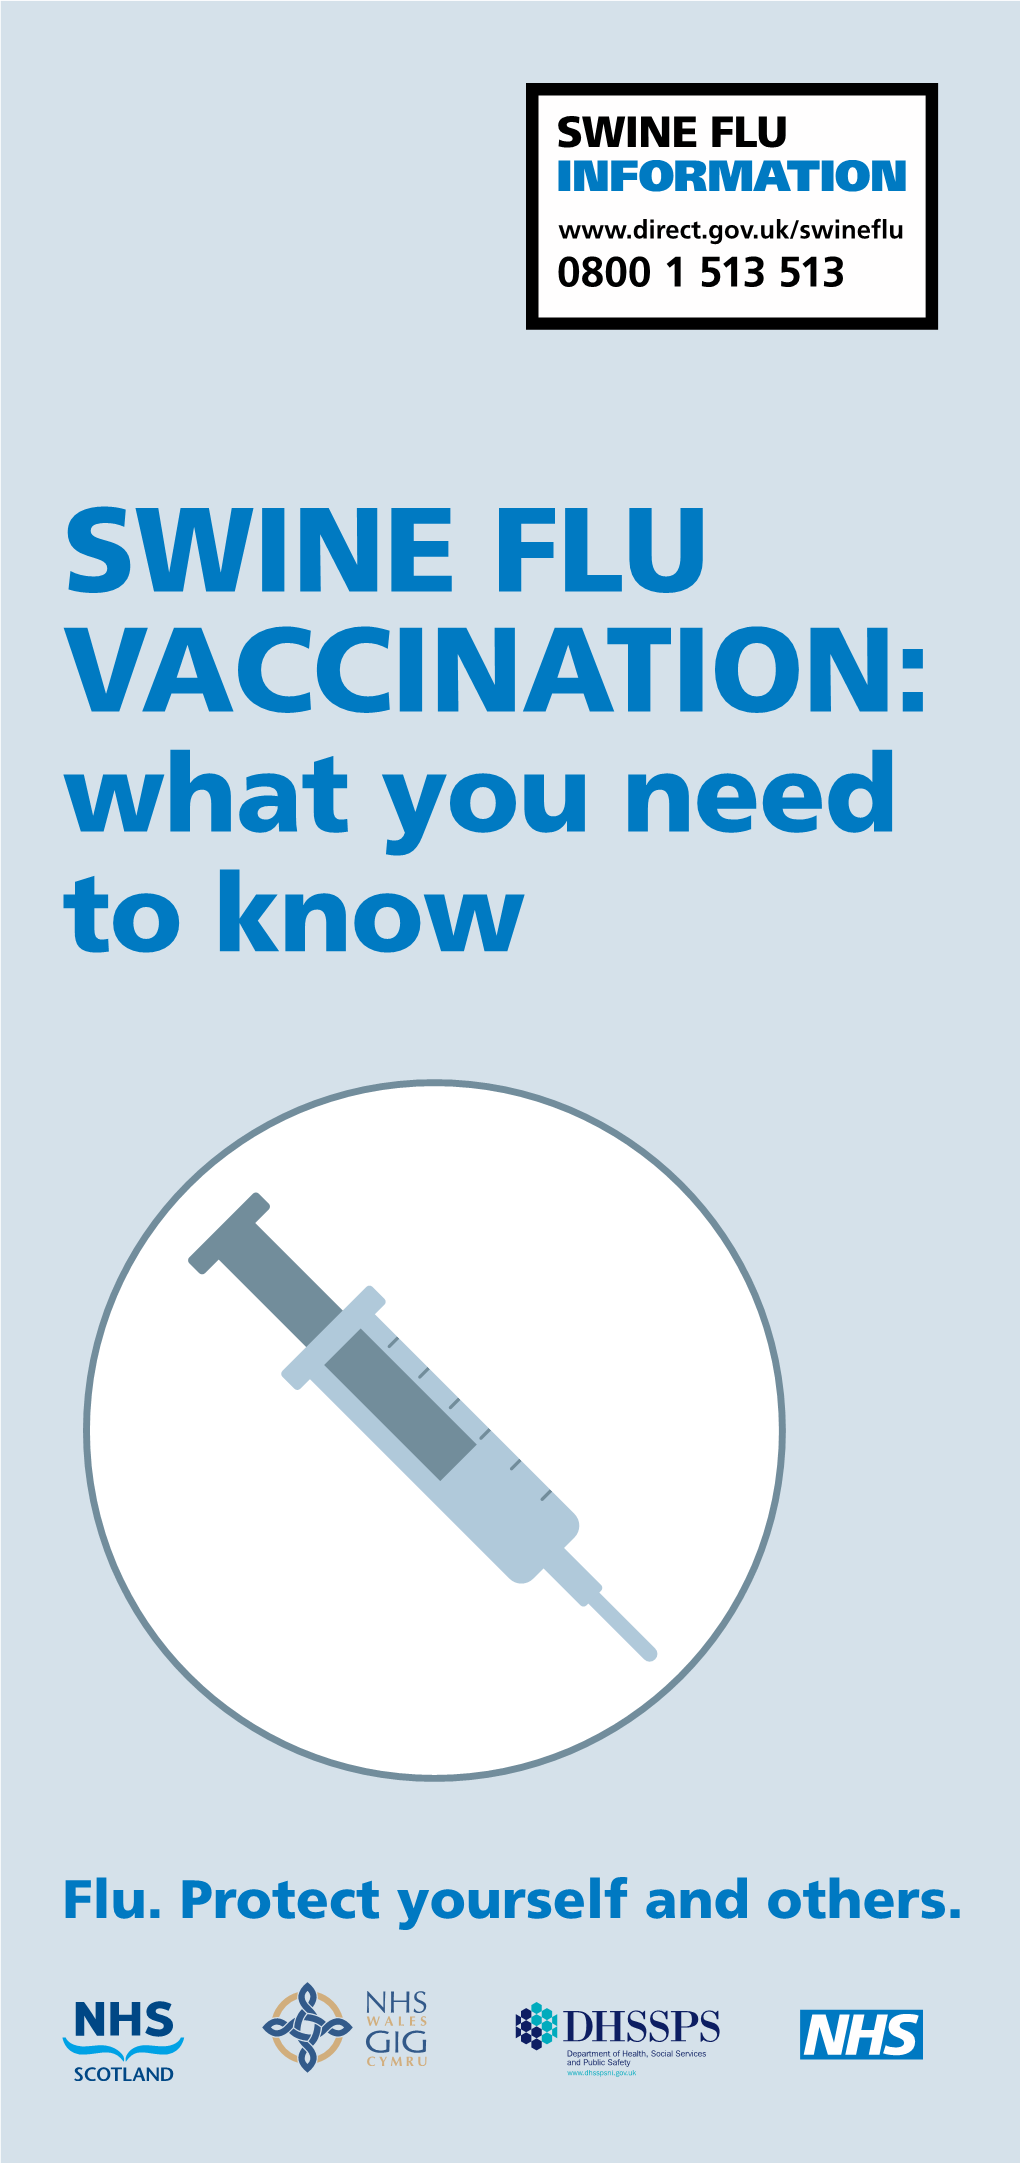 Swine Flu Vaccination: What You Need to Know